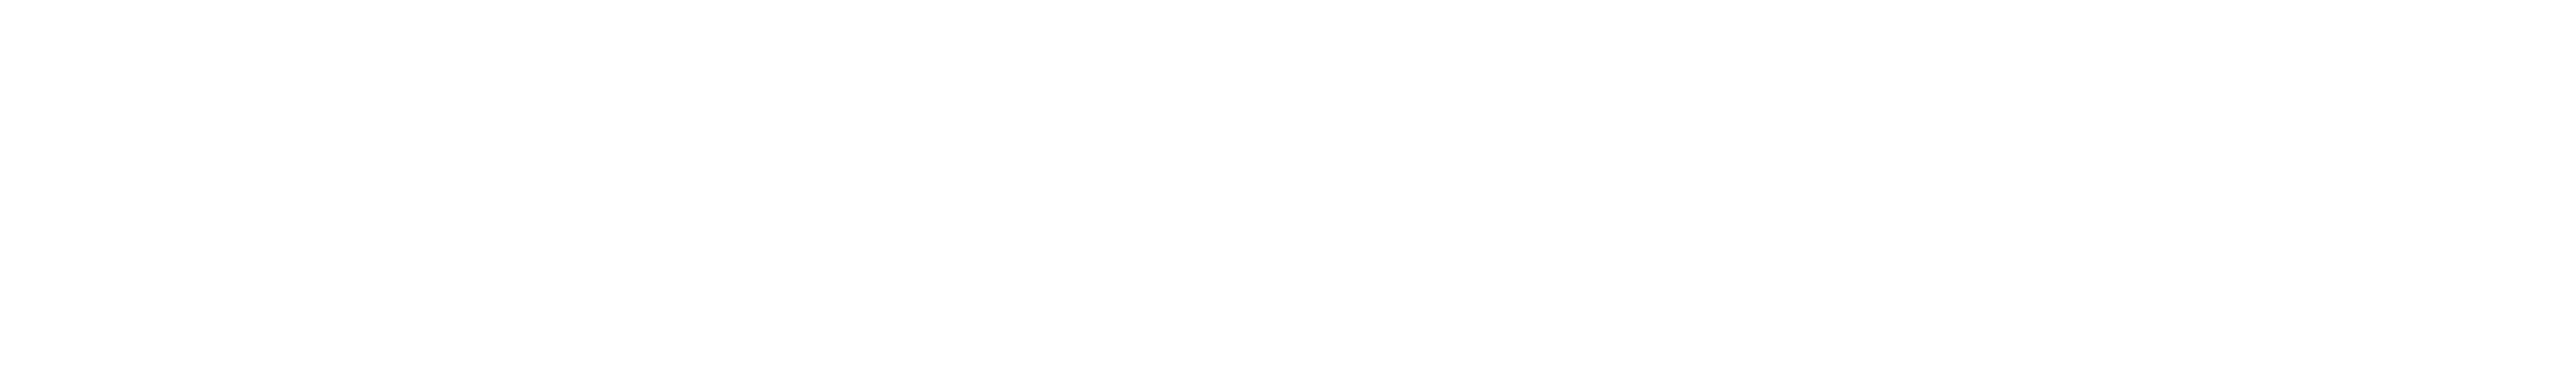 Co-branded KanTime_w_tag - White.png